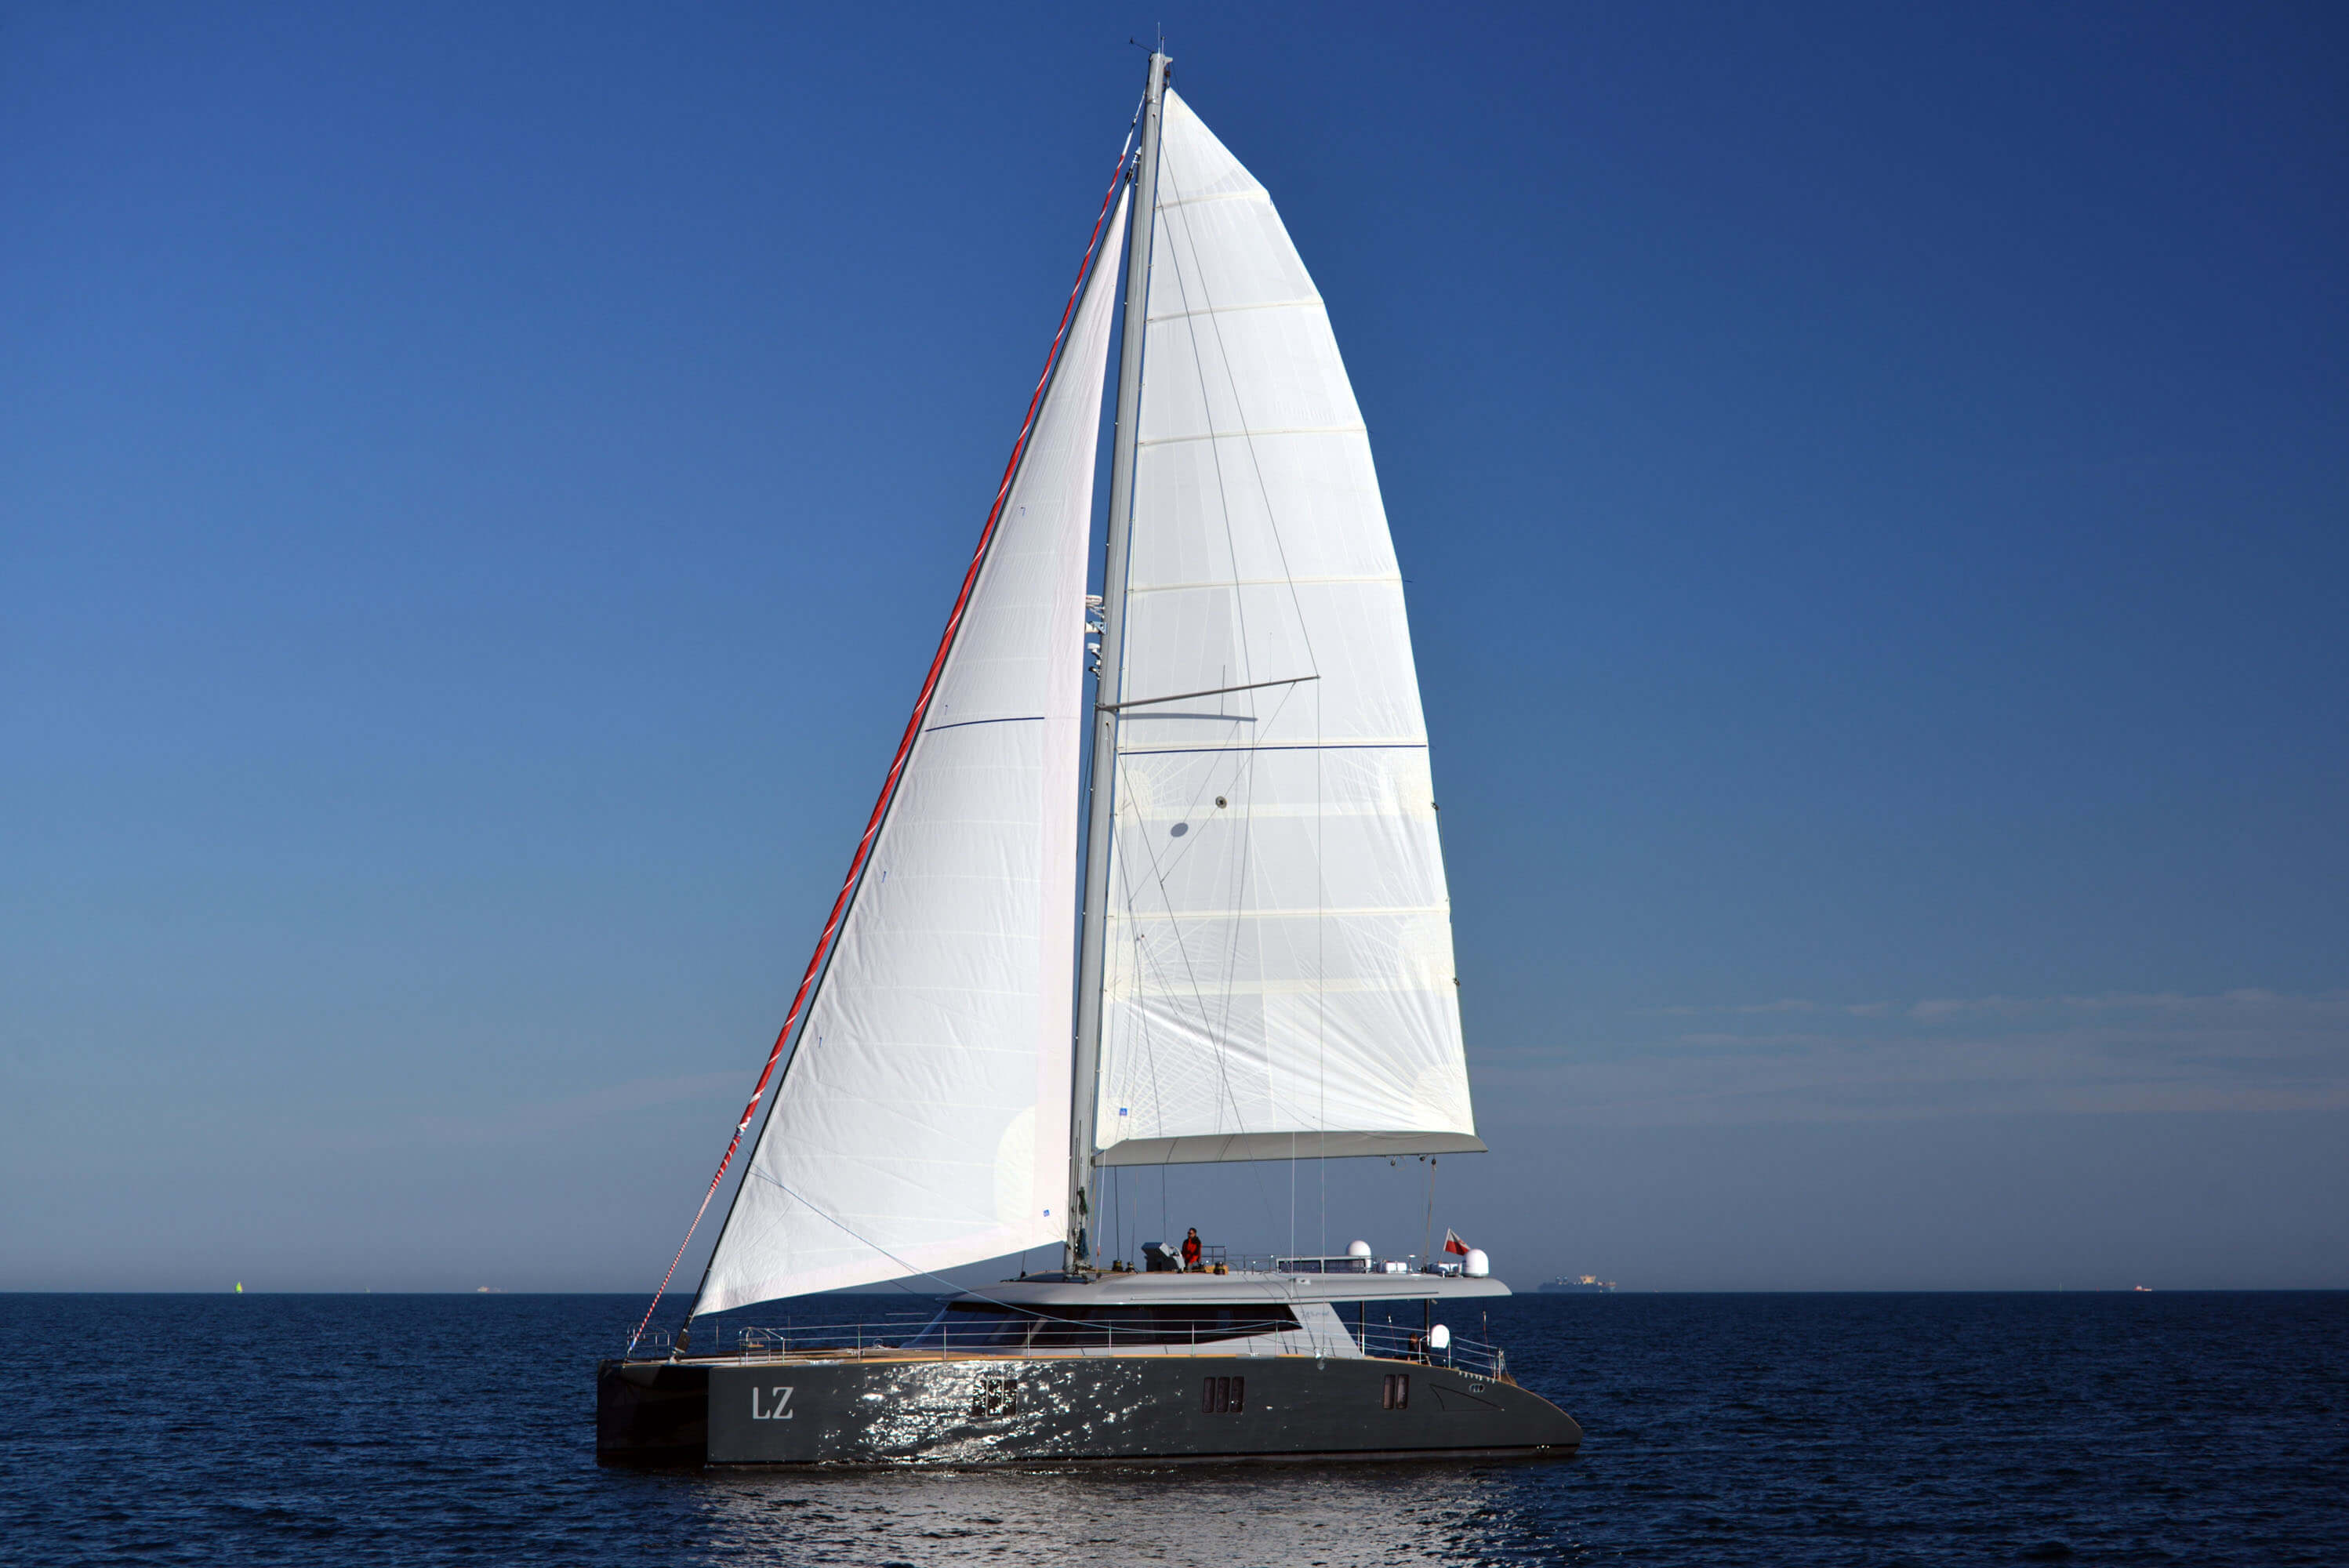 Launched Sail Catamaran for Sale  Sunreef 74 Boat Highlights